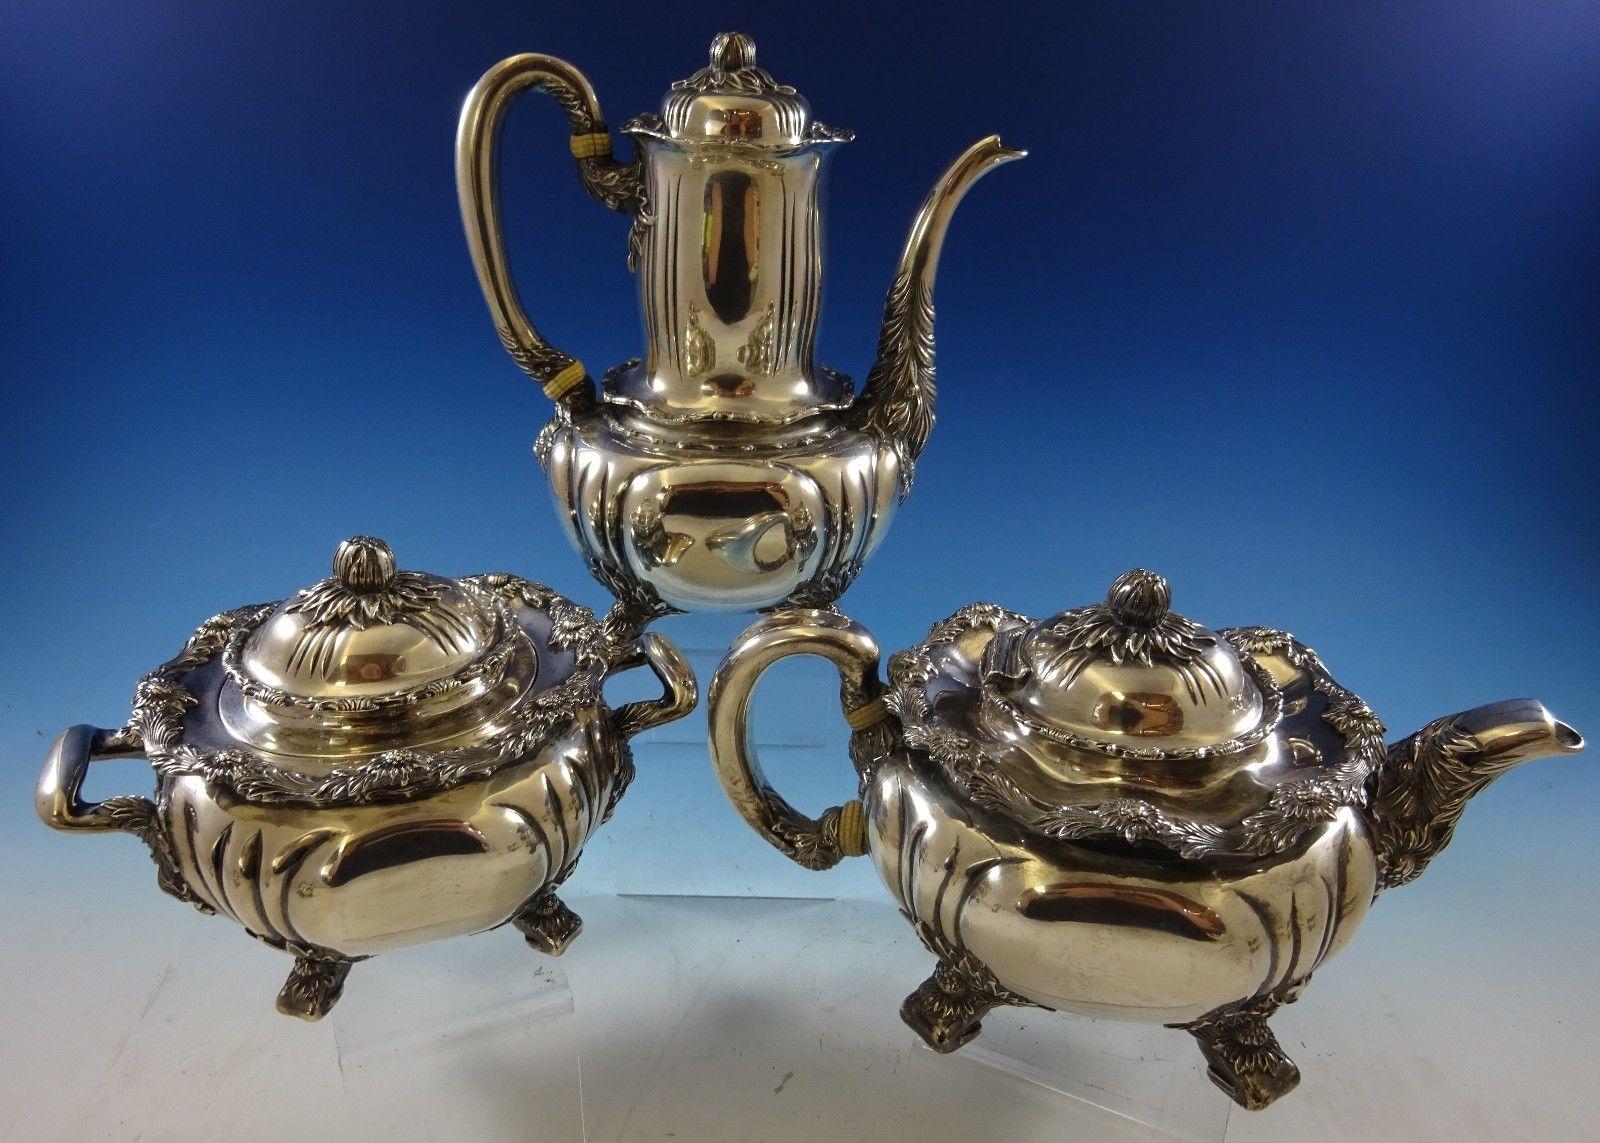 Superb Chrysanthemum by Tiffany & Co. five-piece sterling silver tea set. The pieces are marked #5960/4848. This set includes:

One coffee pot: Measures 8 3/4